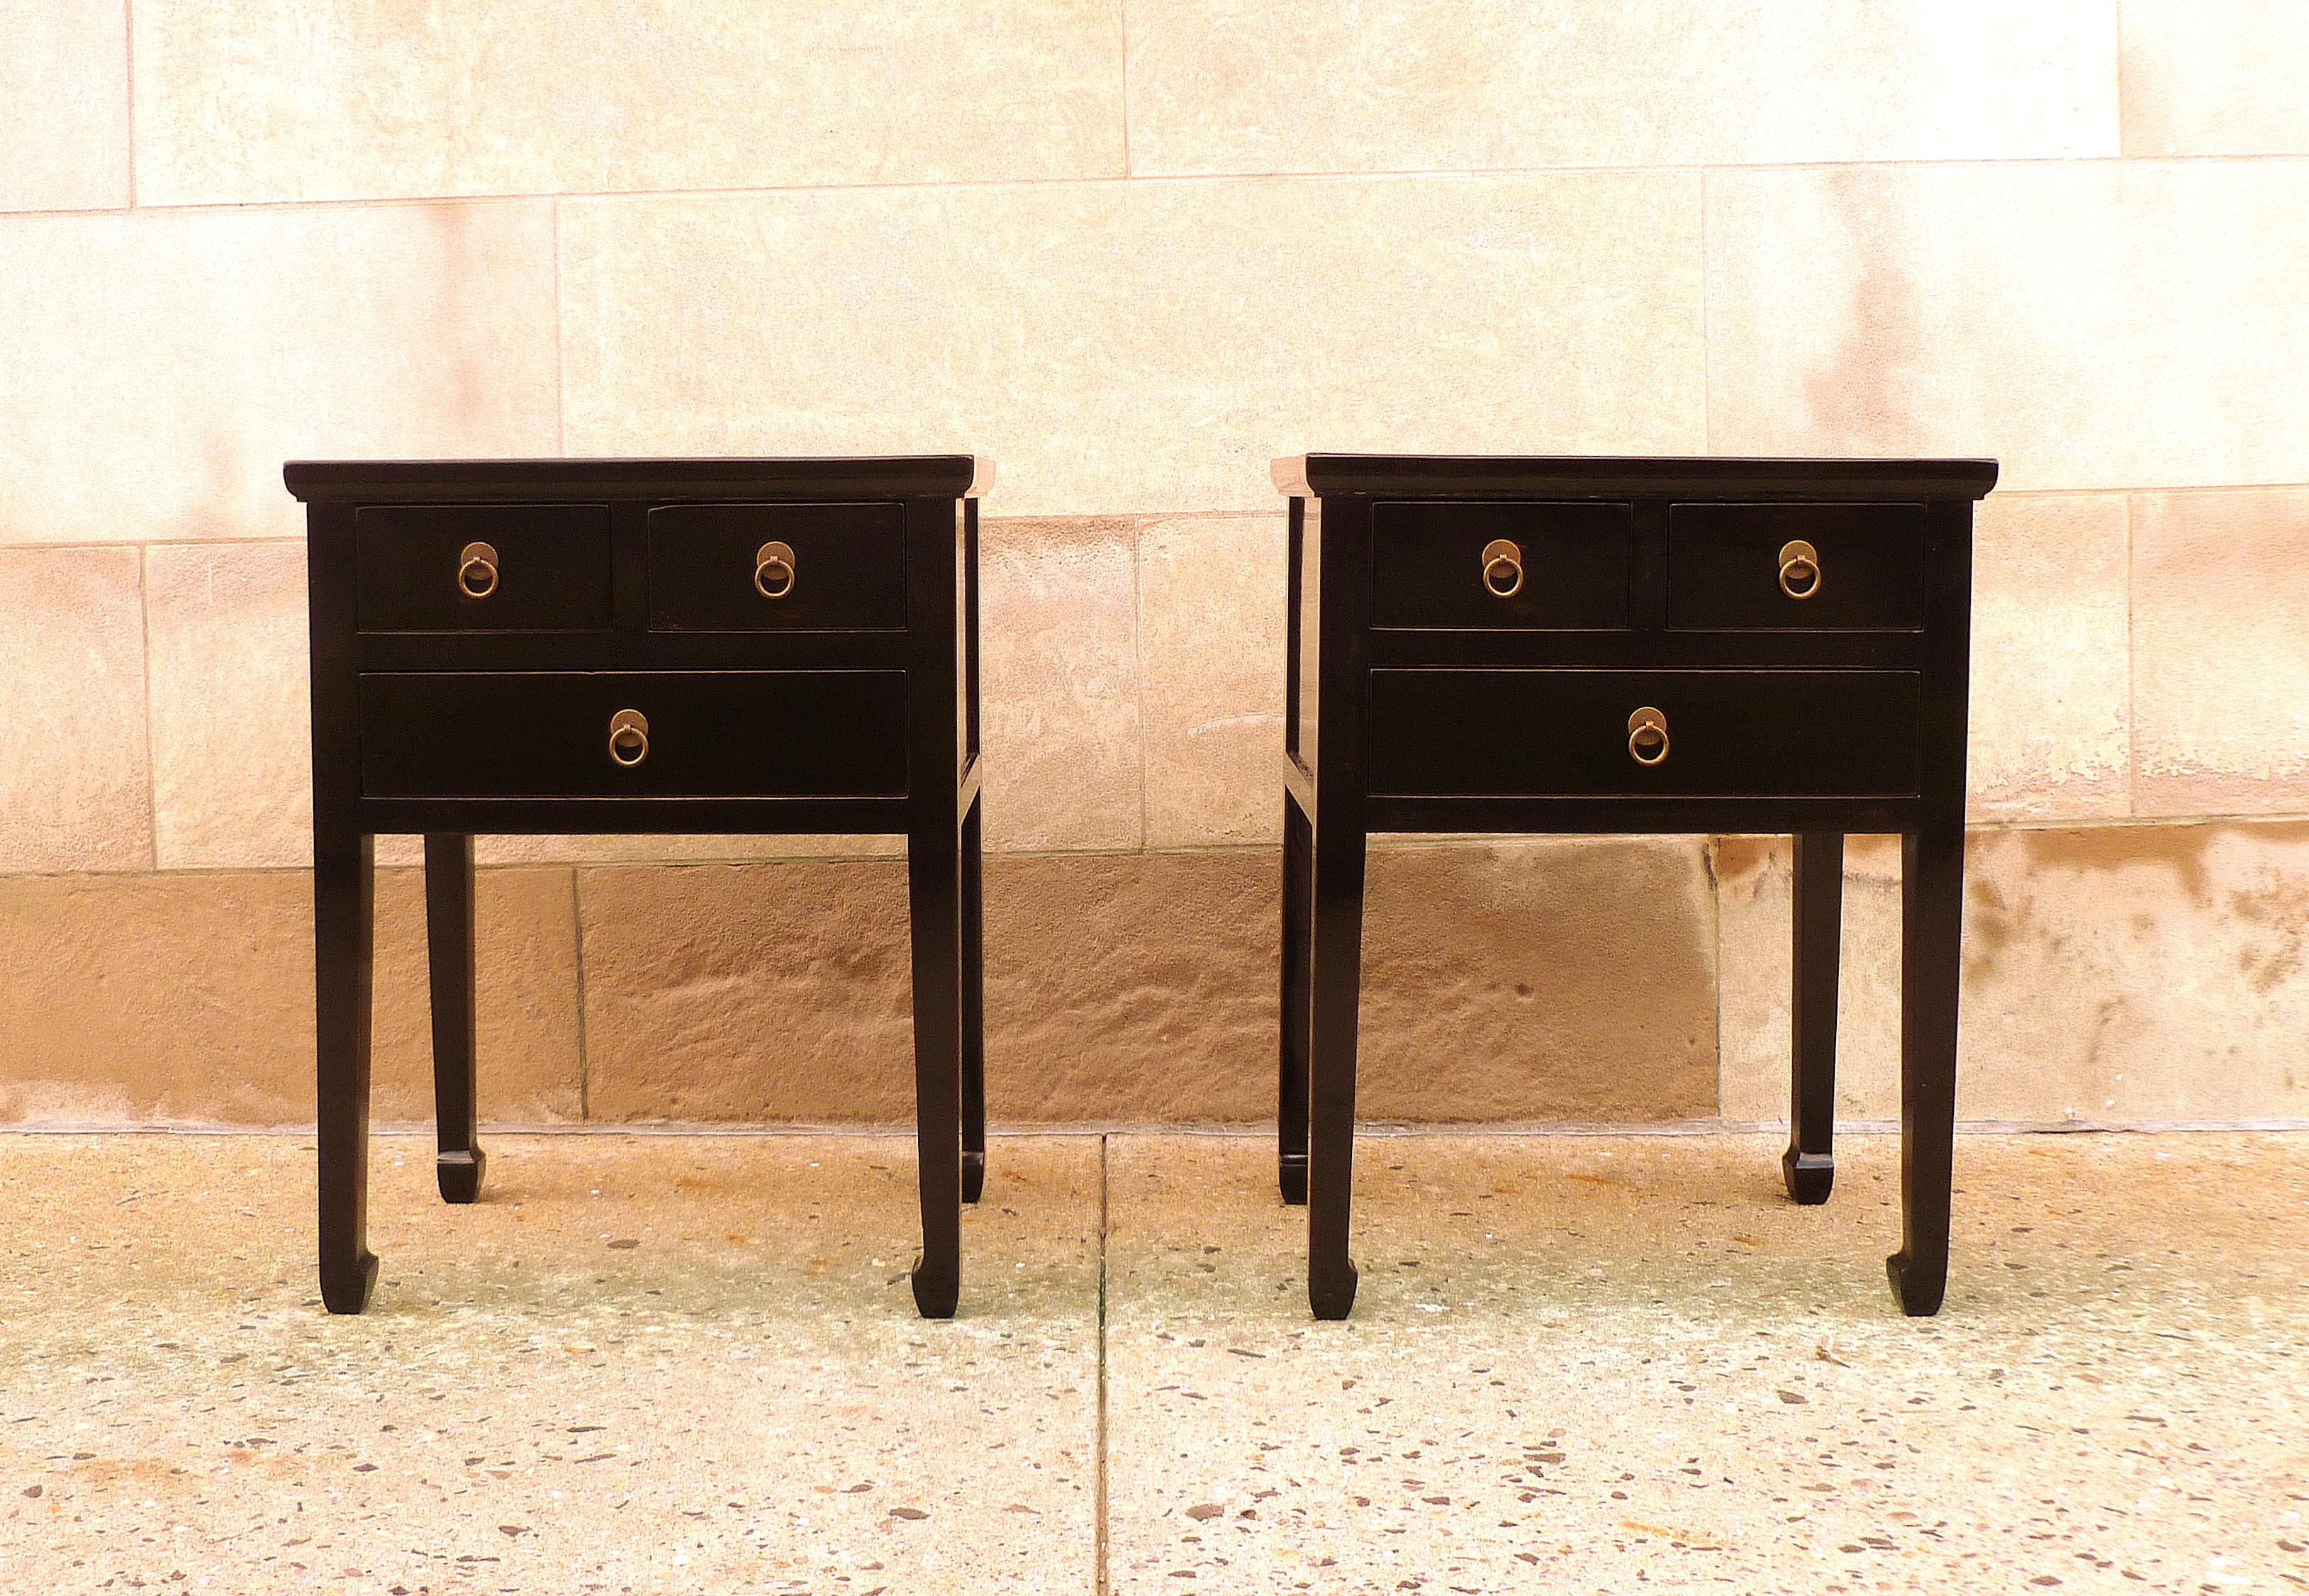 Pair of fine black lacquer end tables. Very elegant and simple form. We carry fine quality furniture with elegant finished and has been appeared many times in 